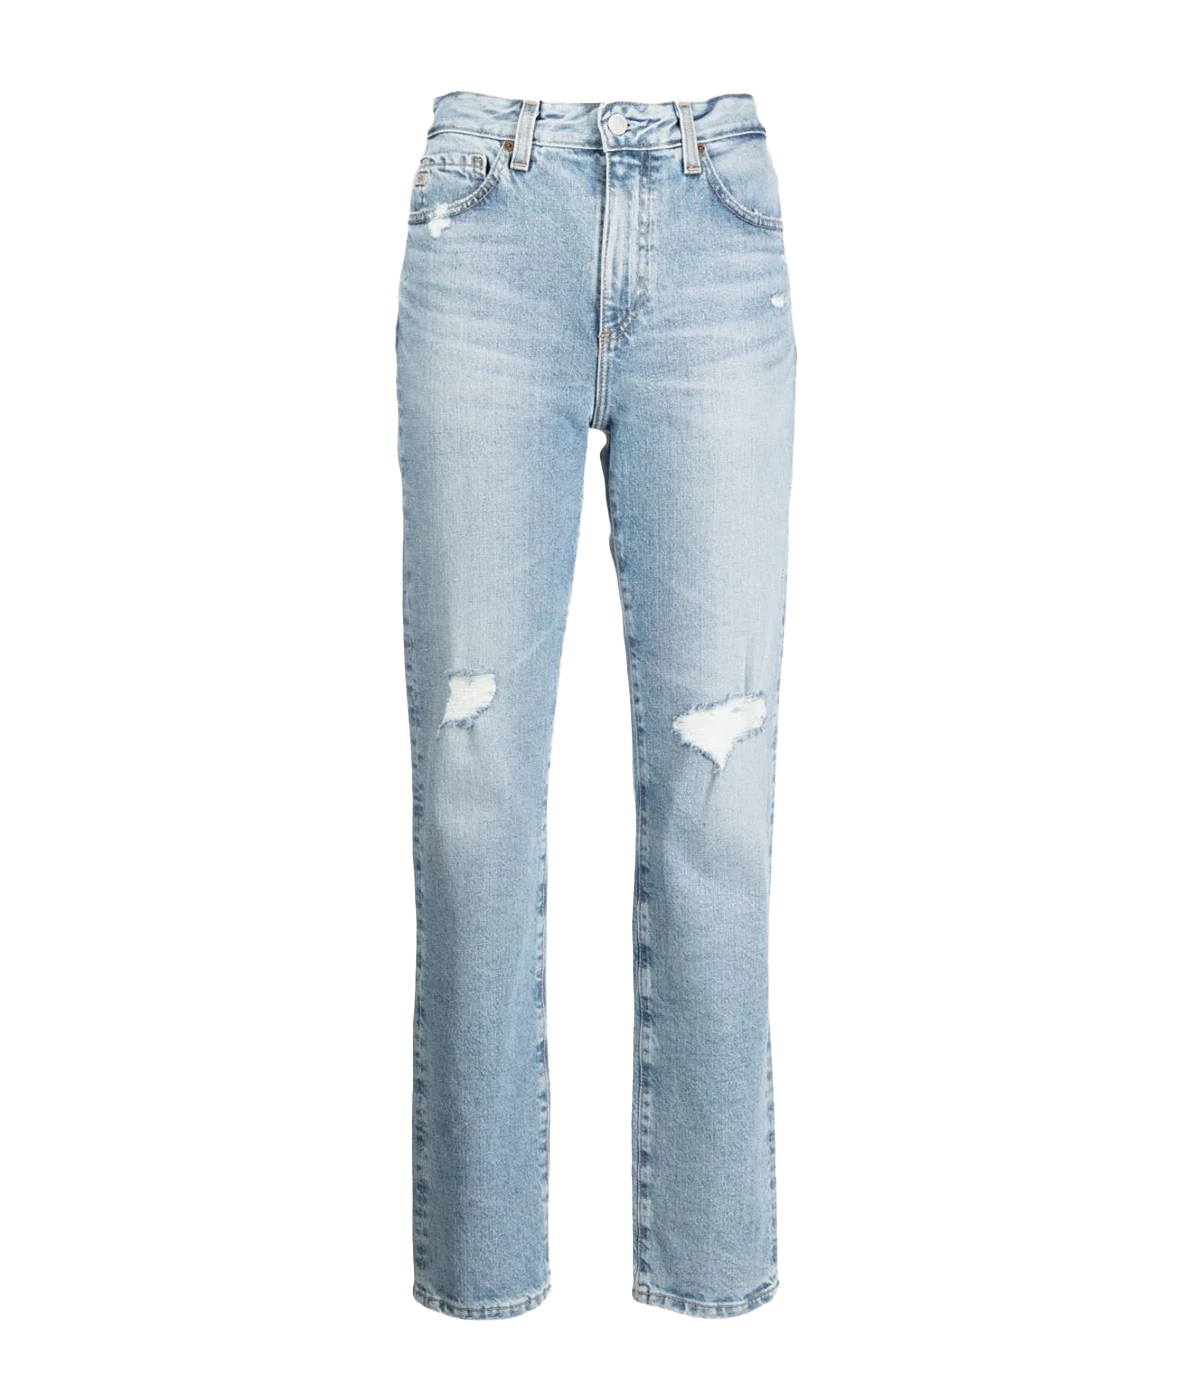 An elevated straight leg jean, in a light wash stretchy denim with chic rips on the knees. Featuring a button and zip closure, 5 pockets and vintage inspired wash, made in USA, comfortable denim, luxury denim, trendy denim, everyday denim.